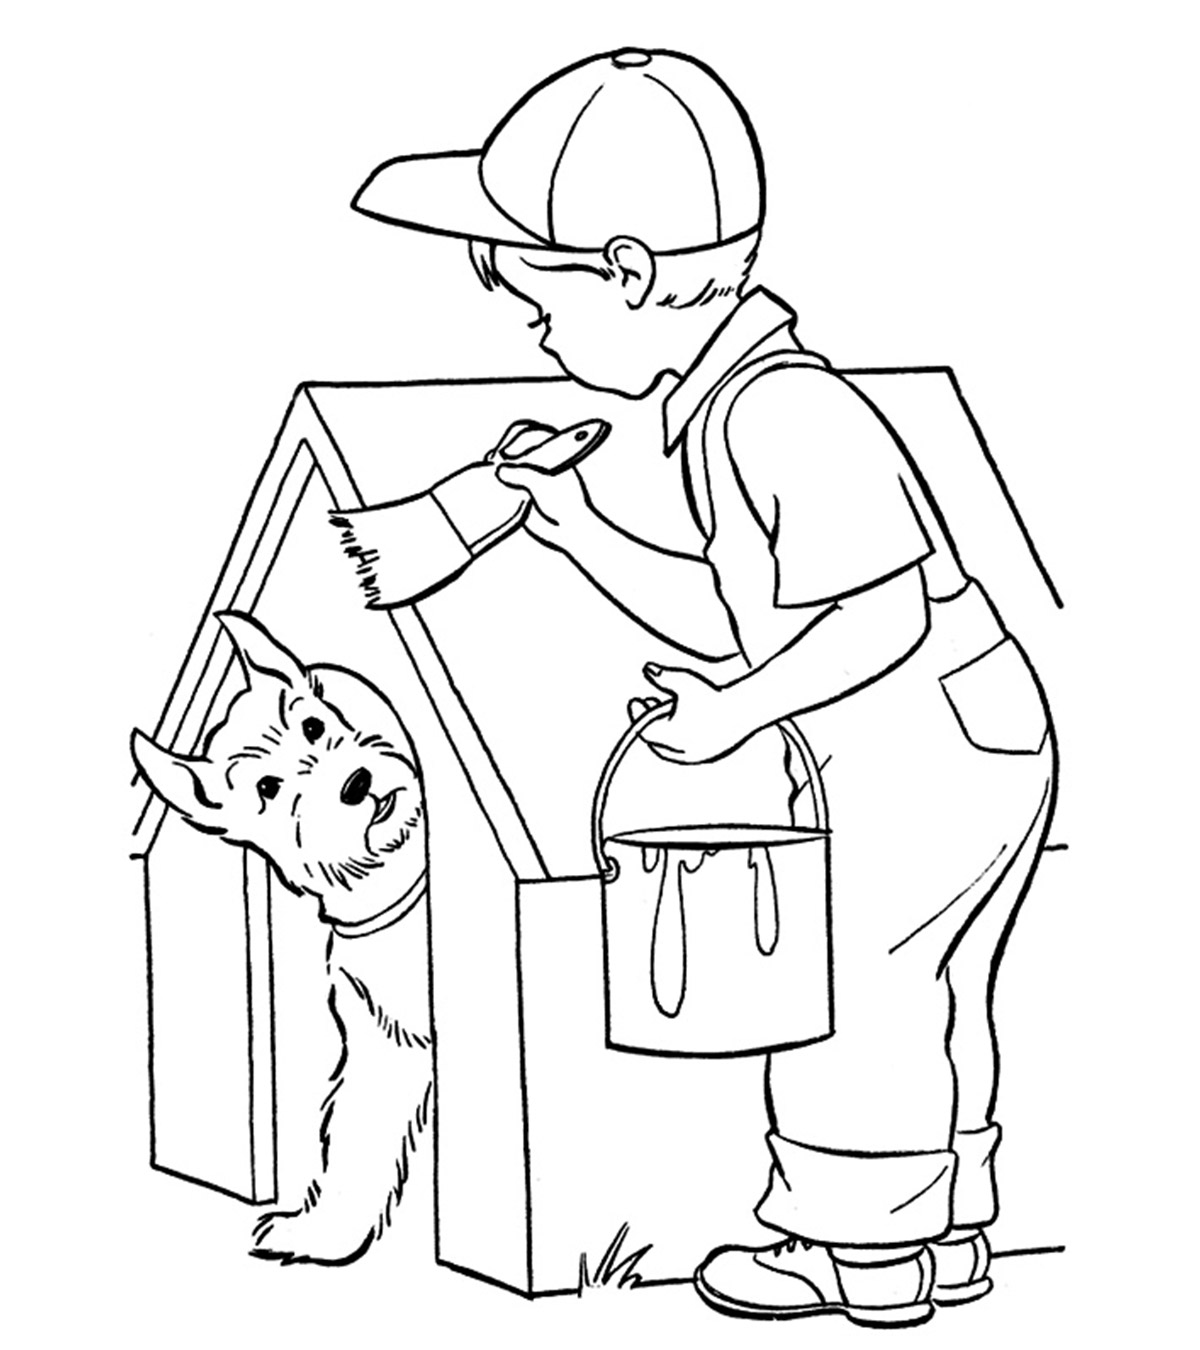 20 Beautiful House Coloring Pages To Keep Your Little One Busy_image